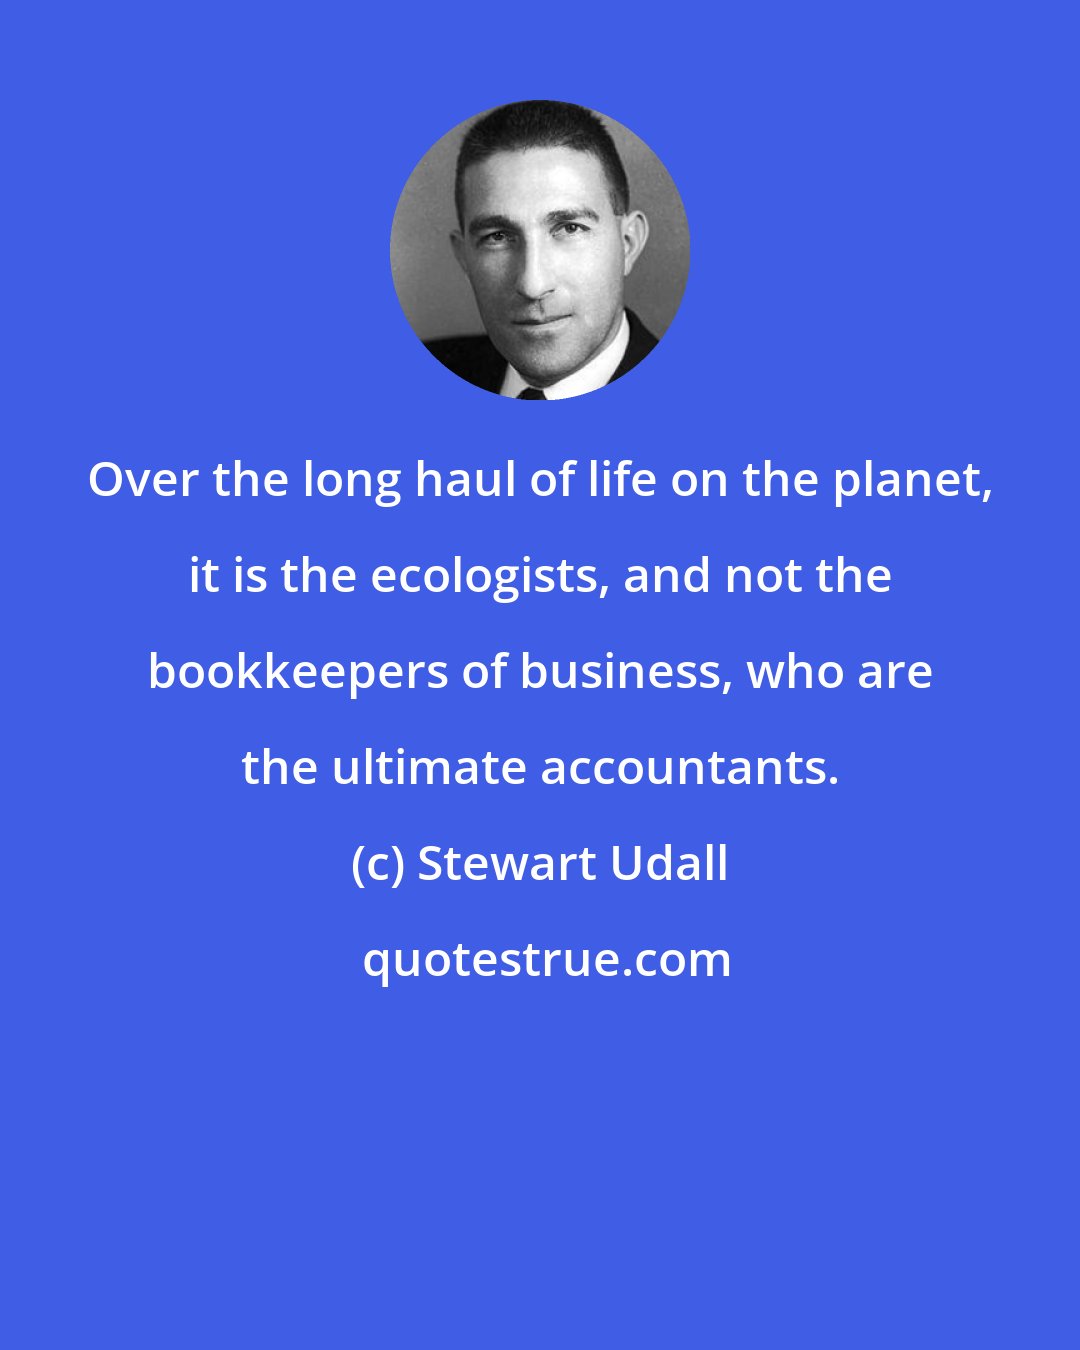 Stewart Udall: Over the long haul of life on the planet, it is the ecologists, and not the bookkeepers of business, who are the ultimate accountants.